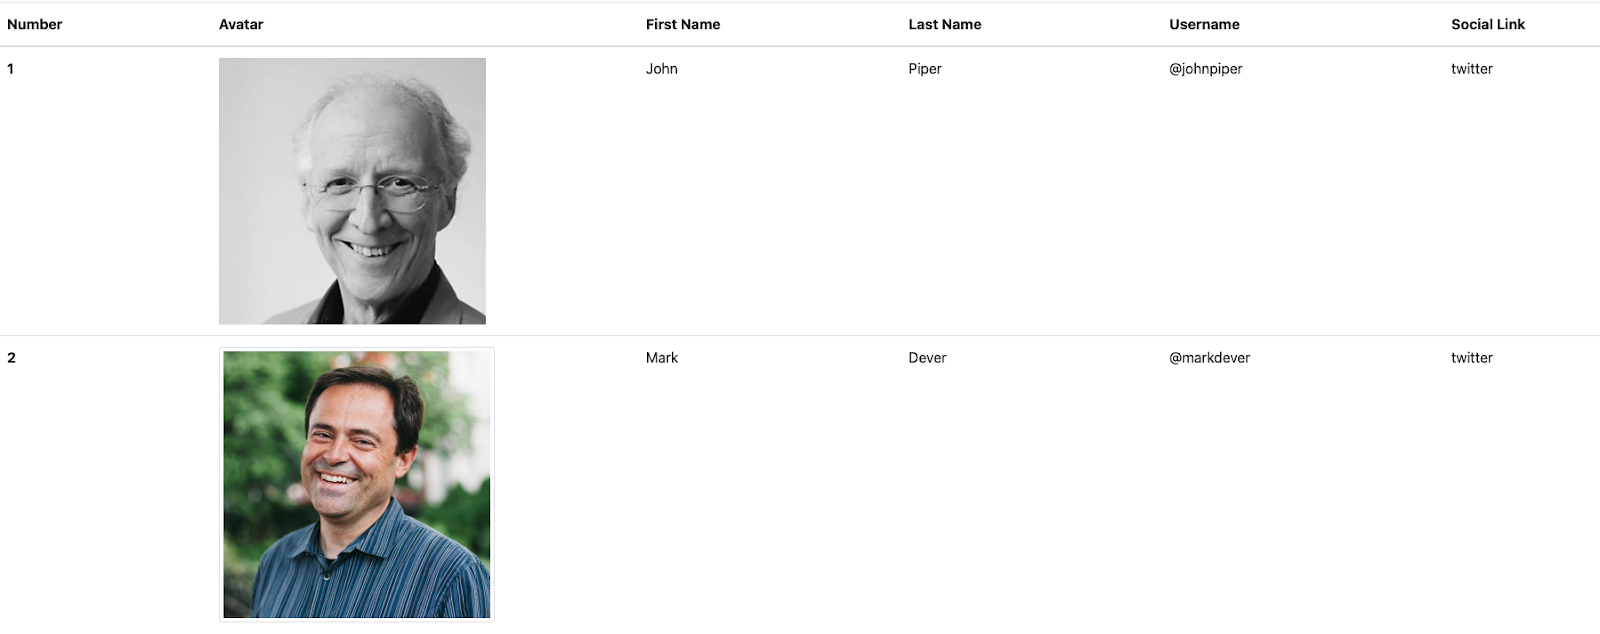 Adding images to Bootstrap tables